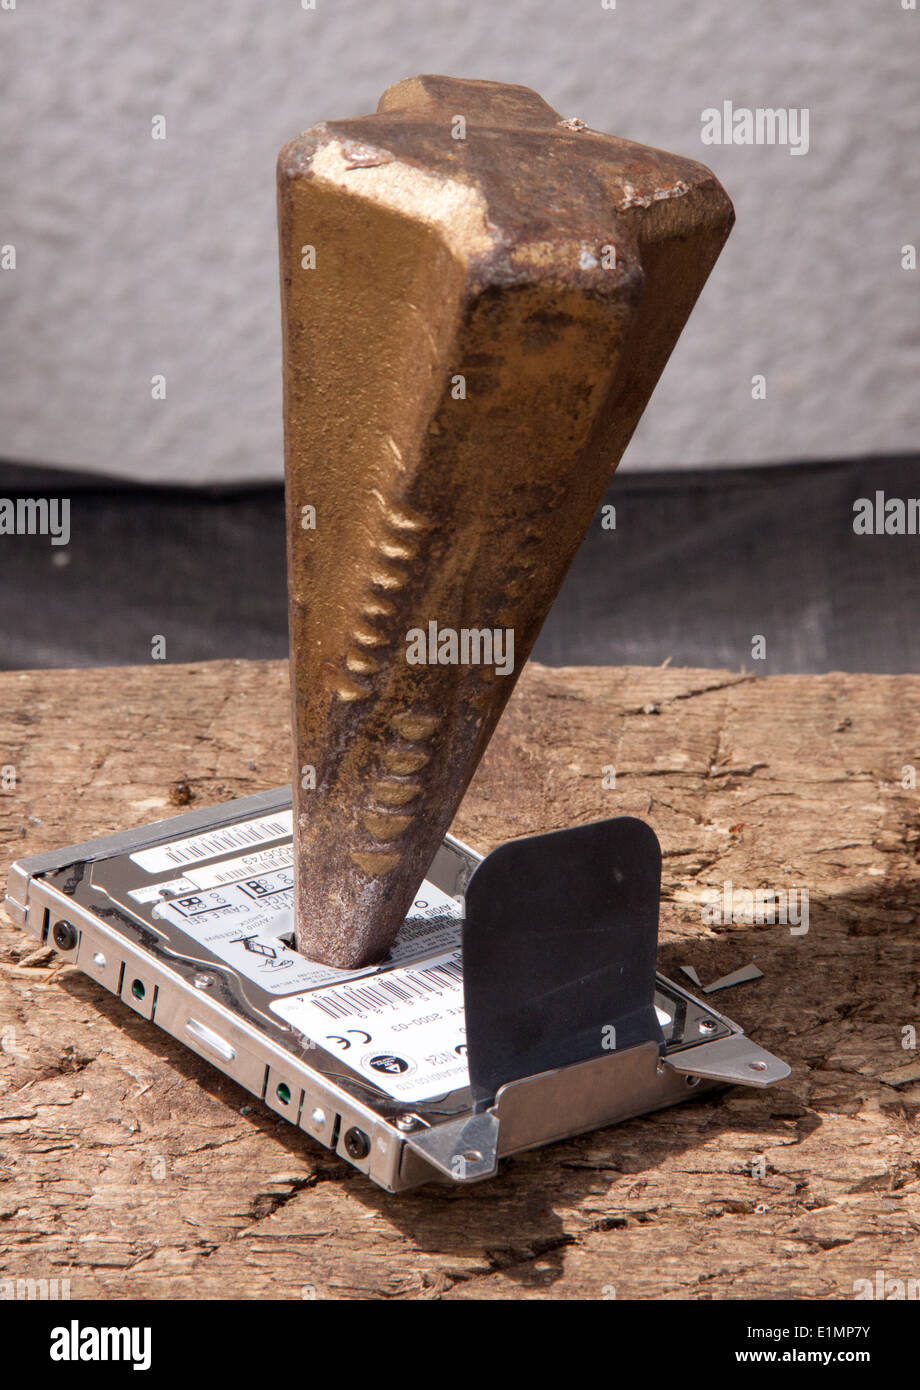 Destroying a computer hard drive by driving a log splitter through it. Stock Photo